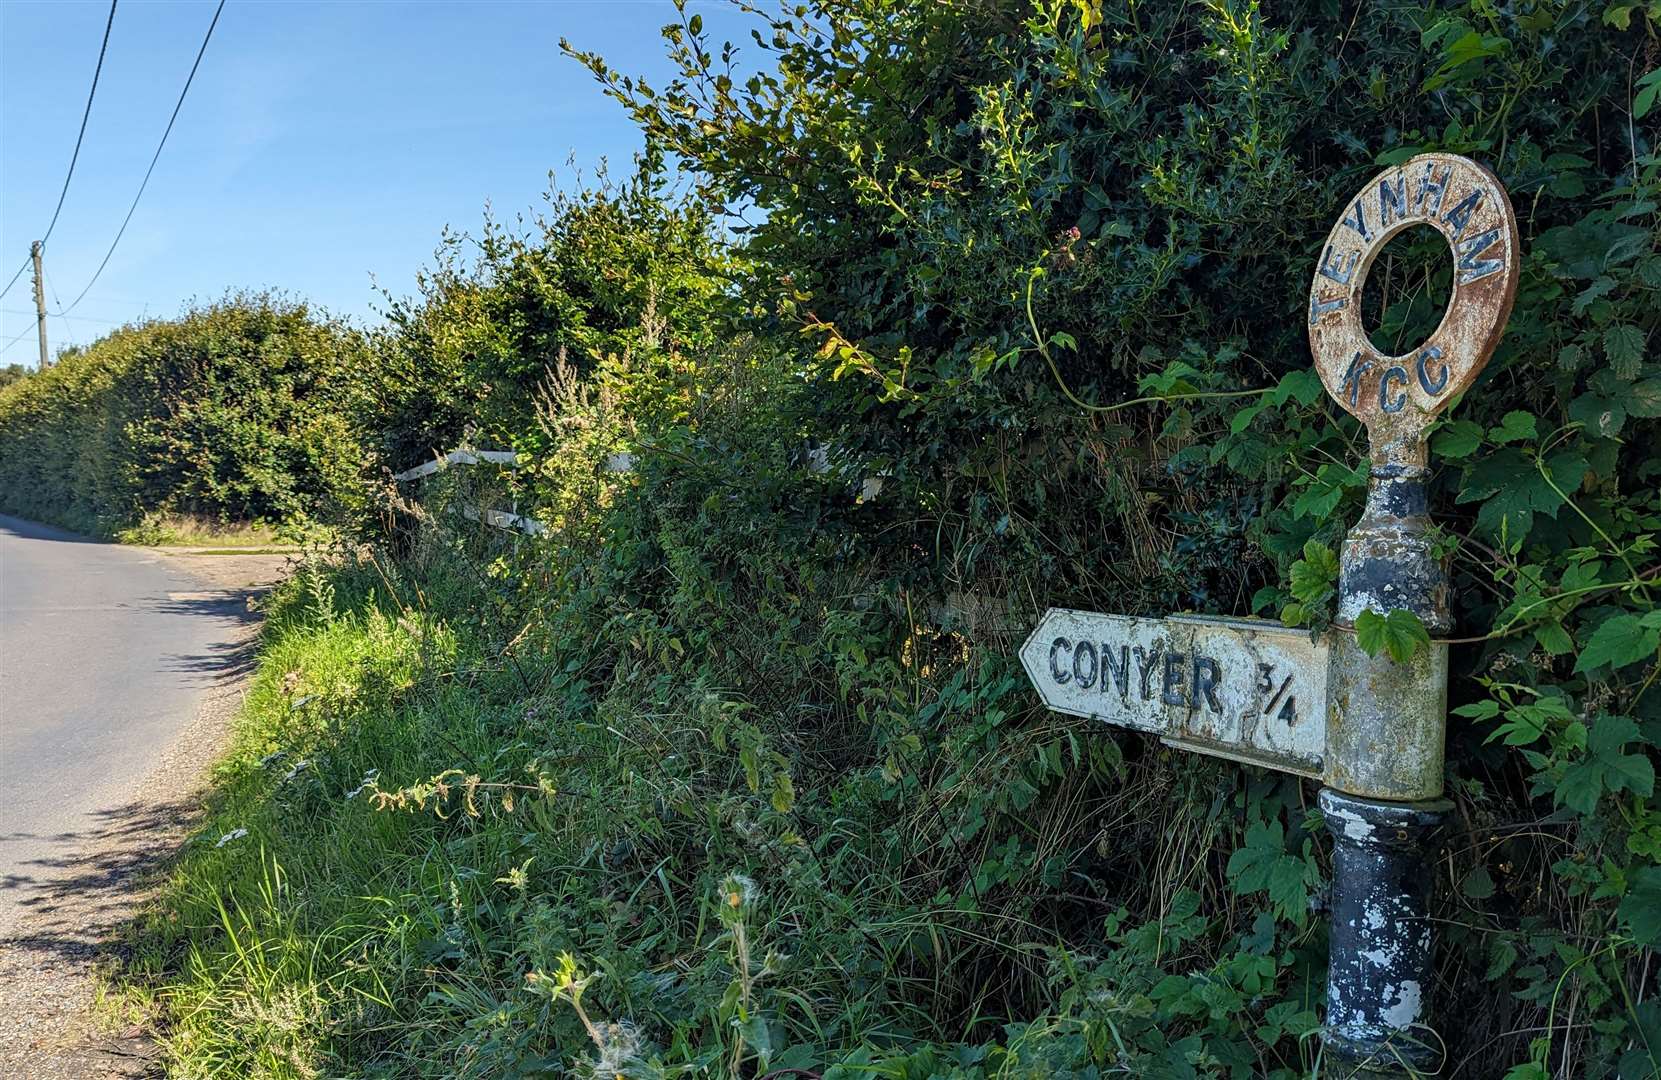 A rather antique road sign points the way to Conyer